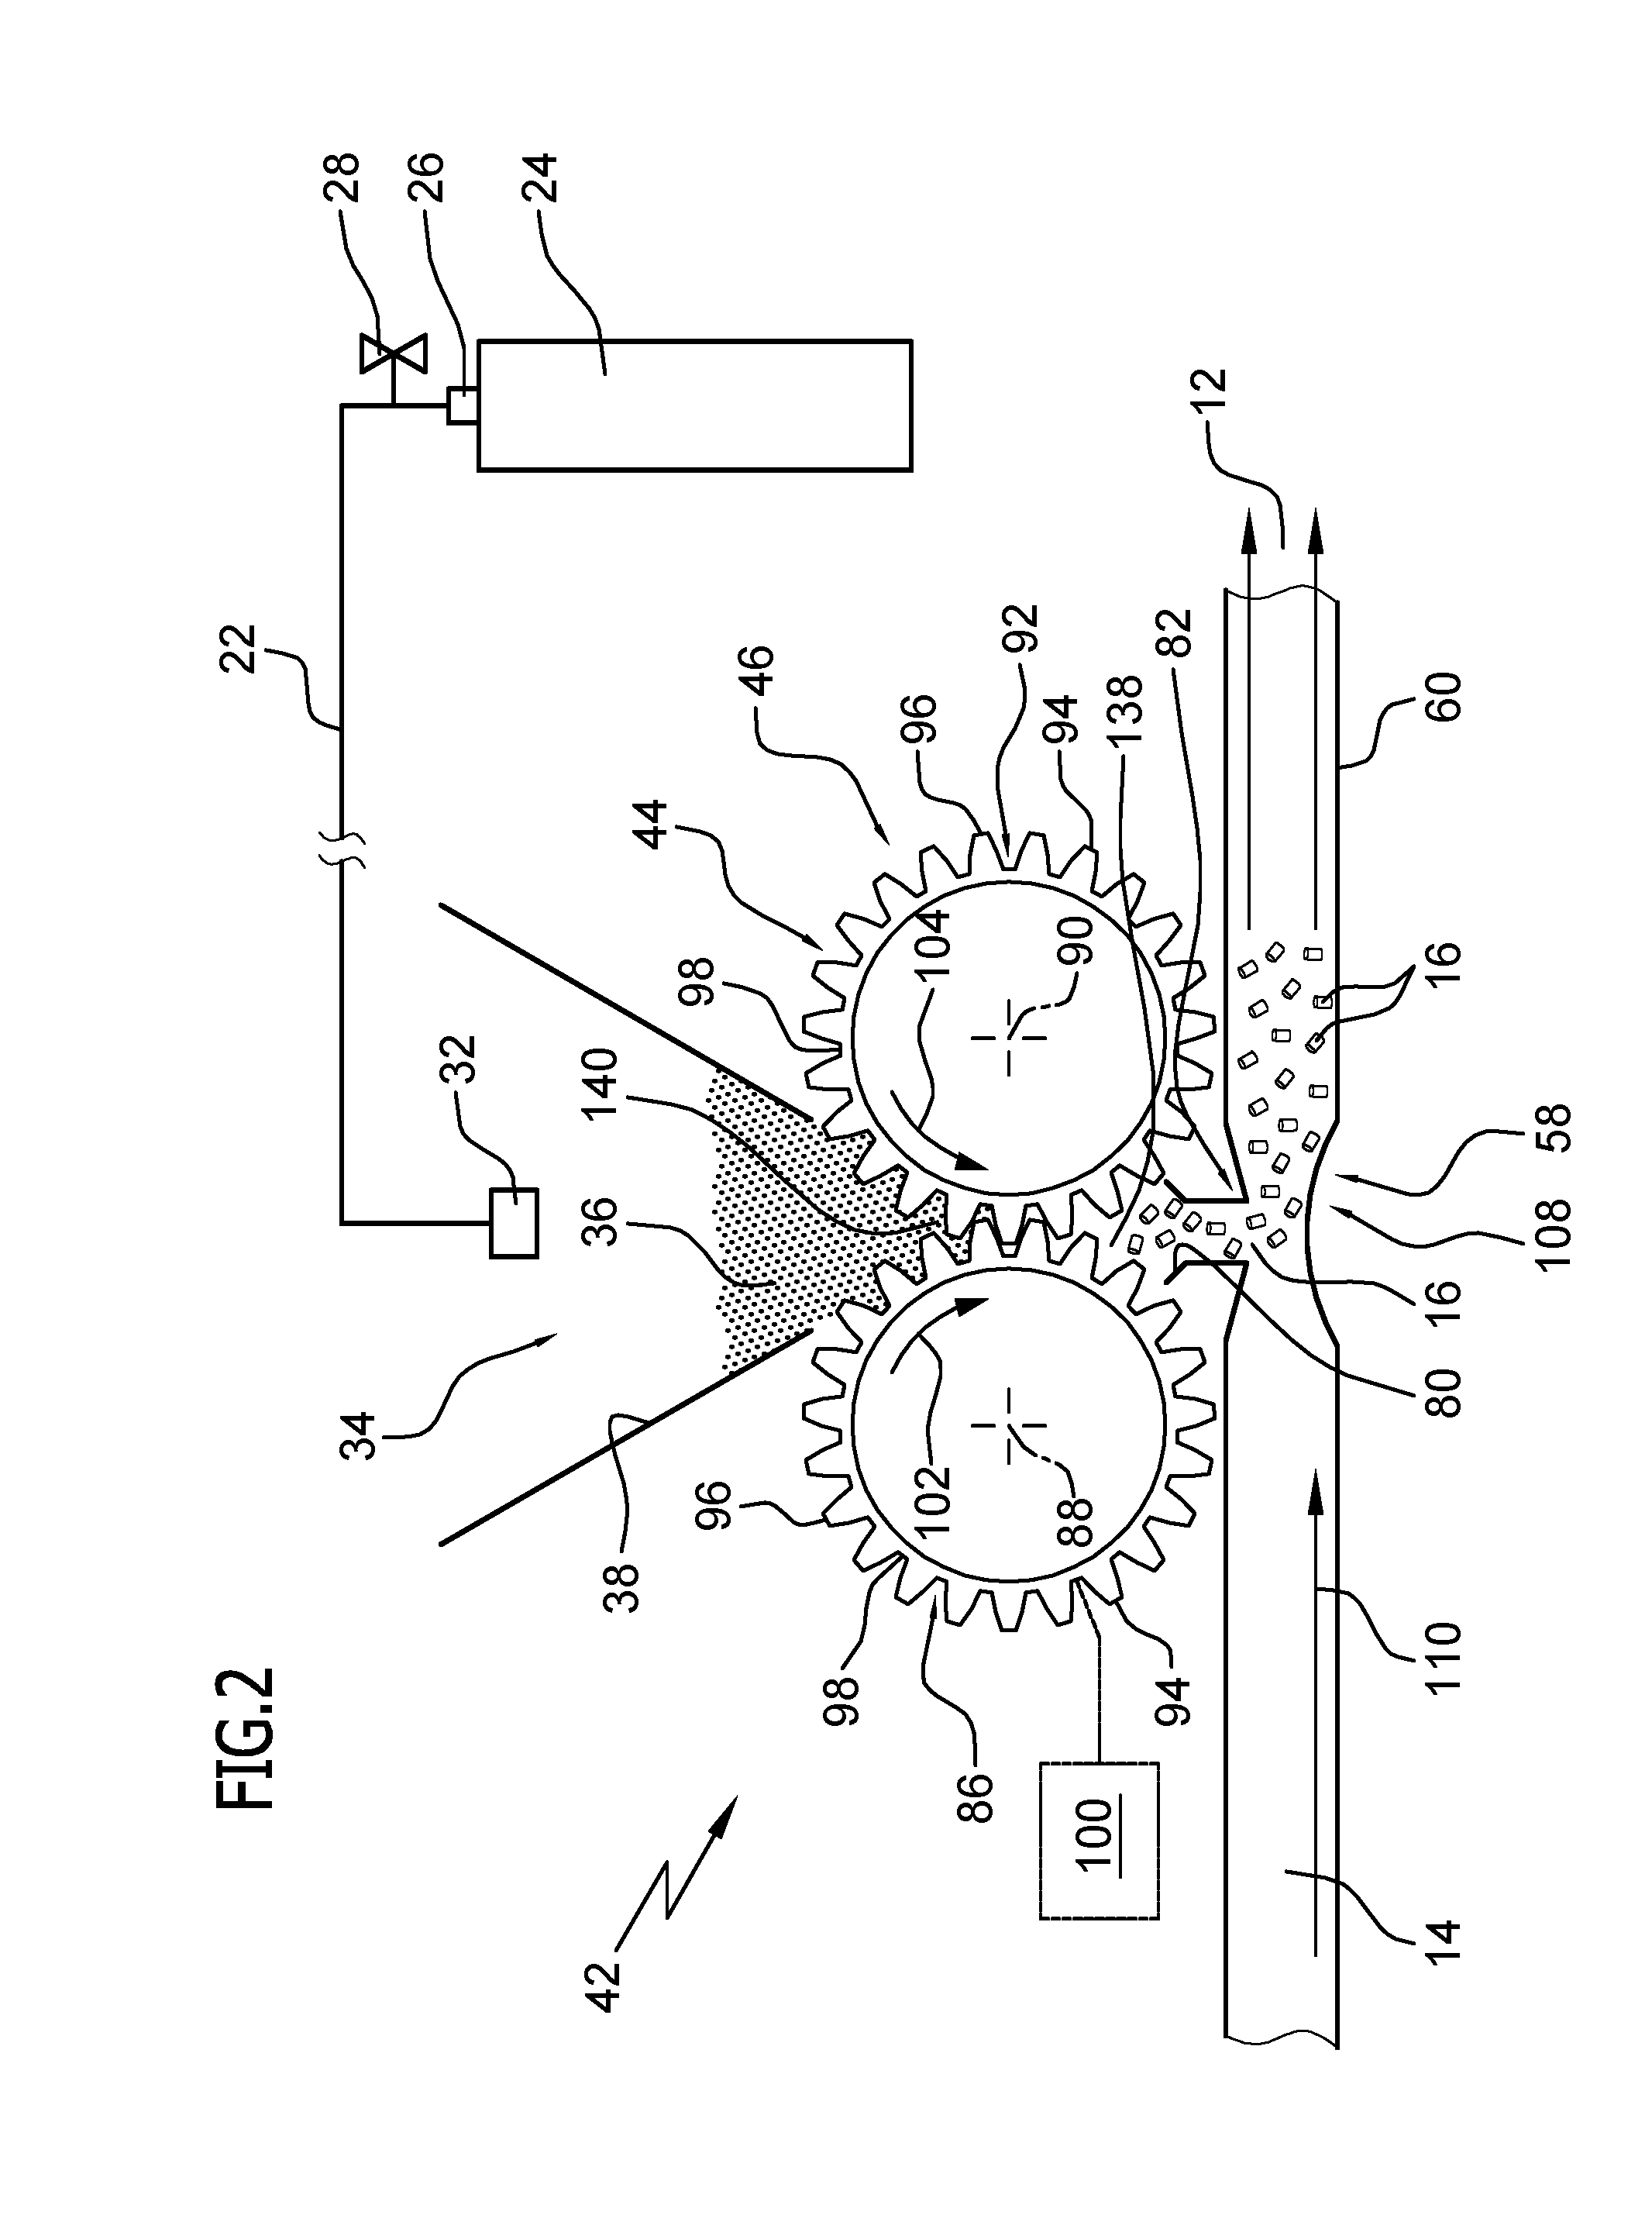 Apparatus for producing co2 pellets from co2 snow and cleaning device